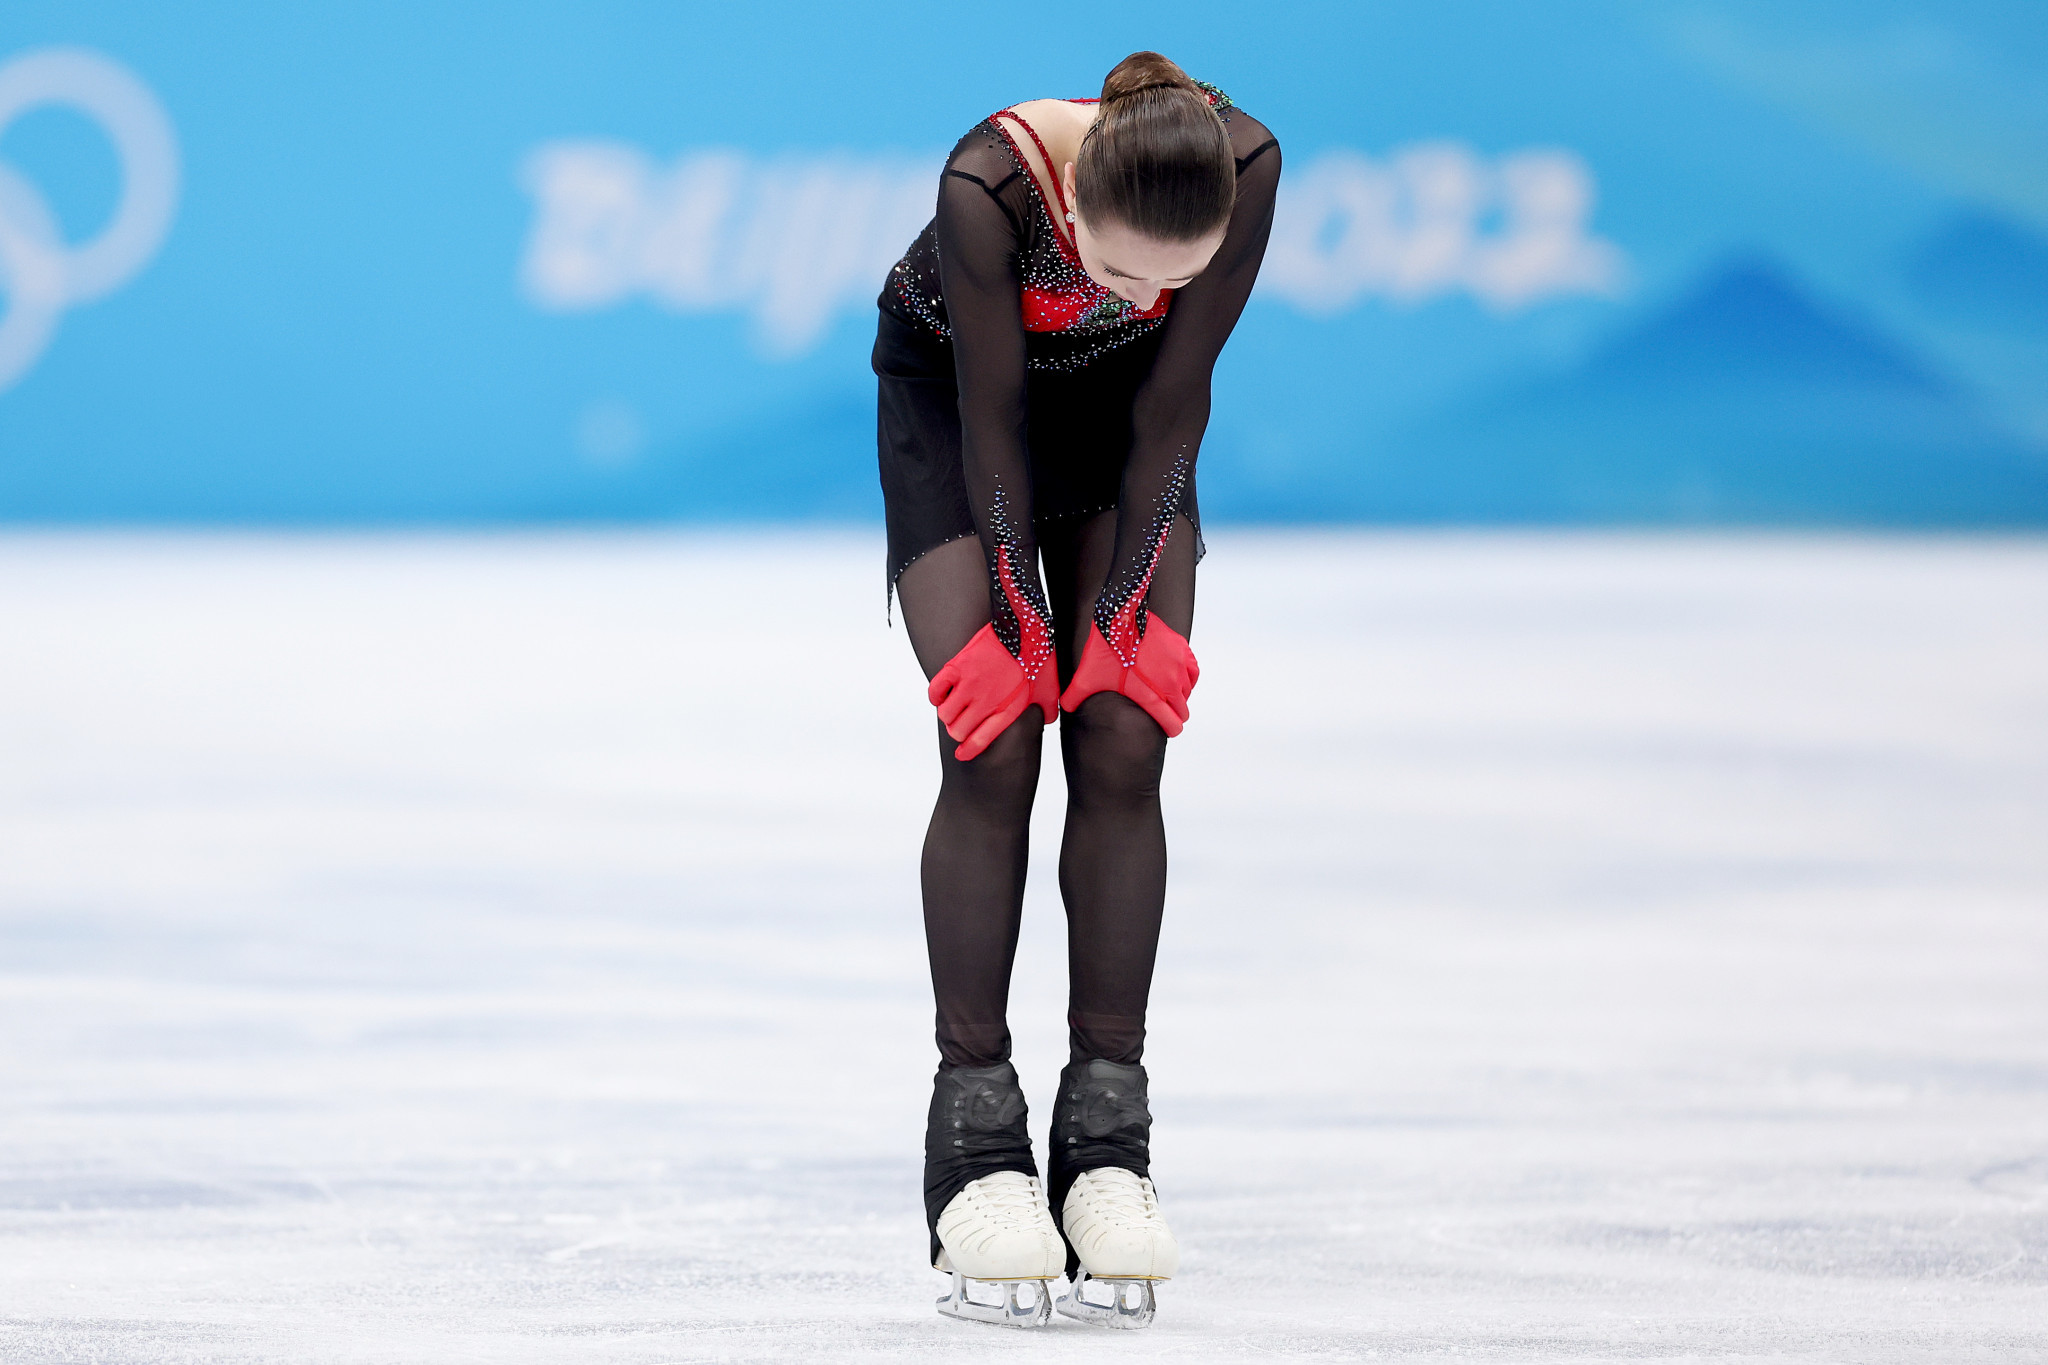 The 15-year-old Kamila Valieva's doping scandal at the Beijing 2022 Winter Olympics was among a range of shocking developments in the sporting world this year ©Getty Images